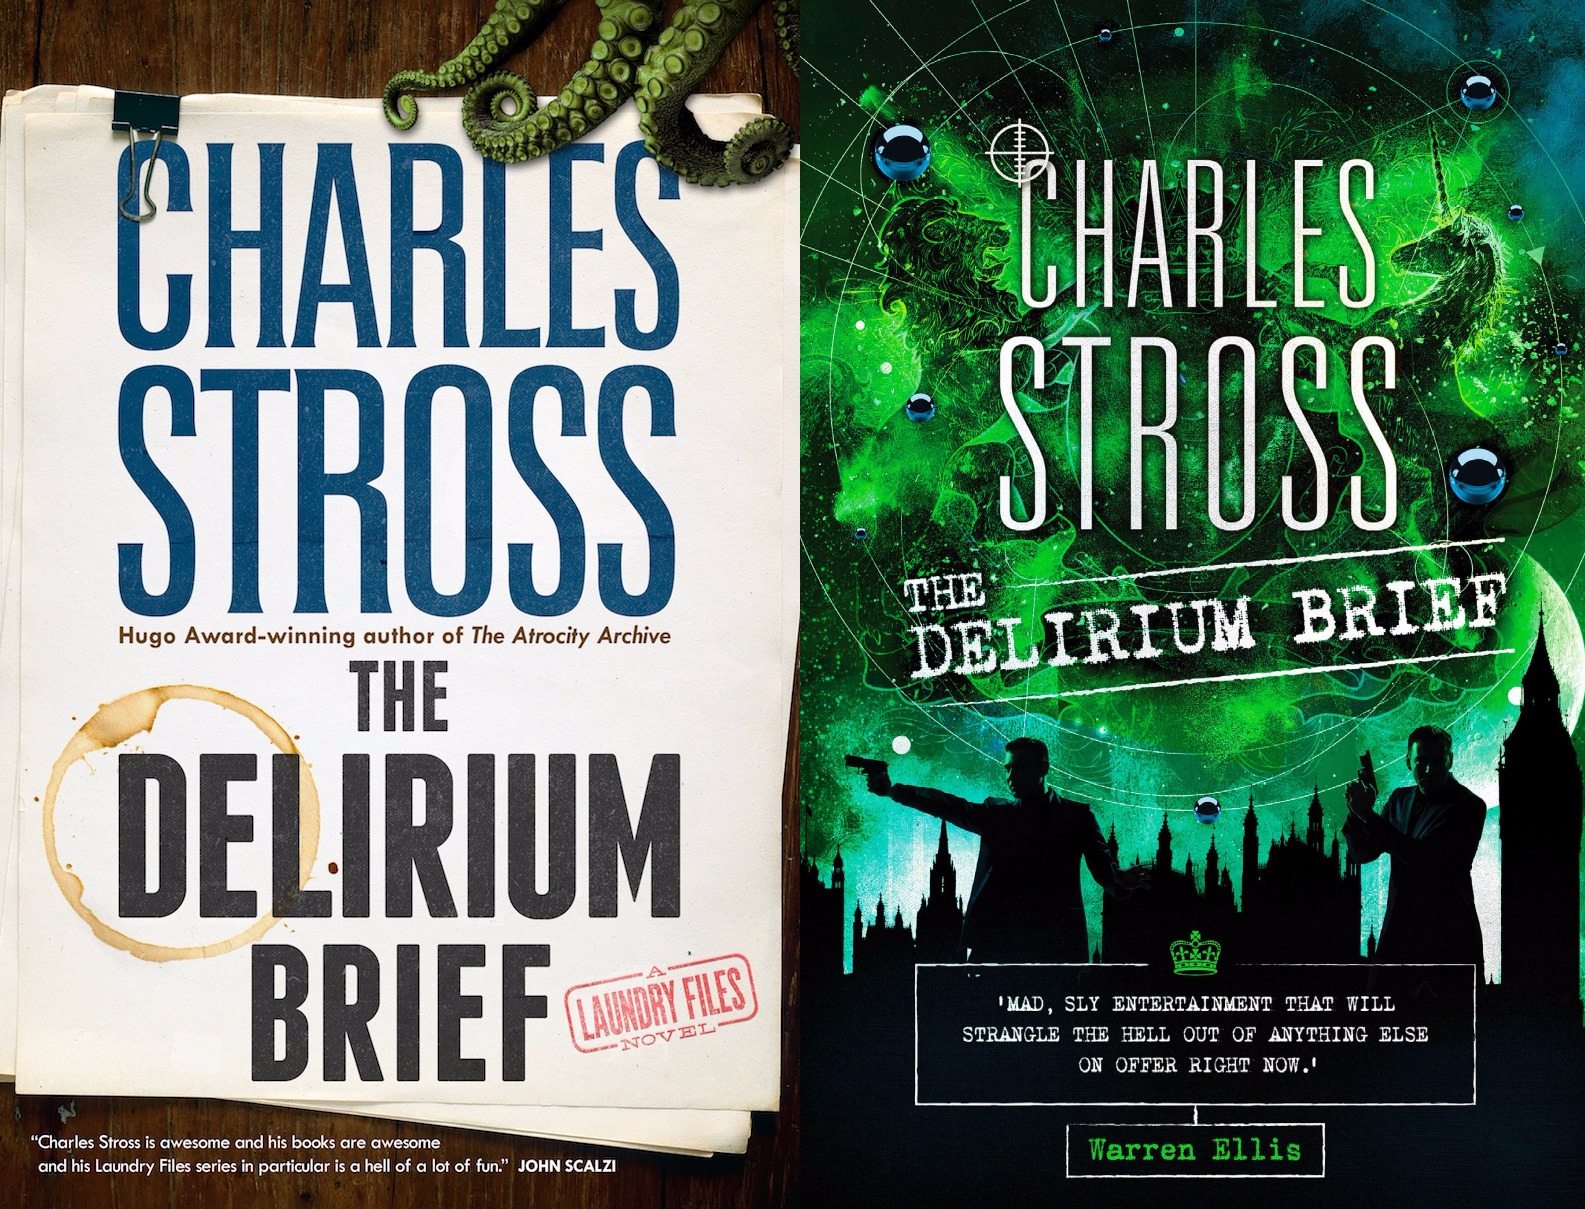 Read The Entire First Chapter Of Charles Stross’ New Laundry Files Novel, The Delirium Brief, Right Here